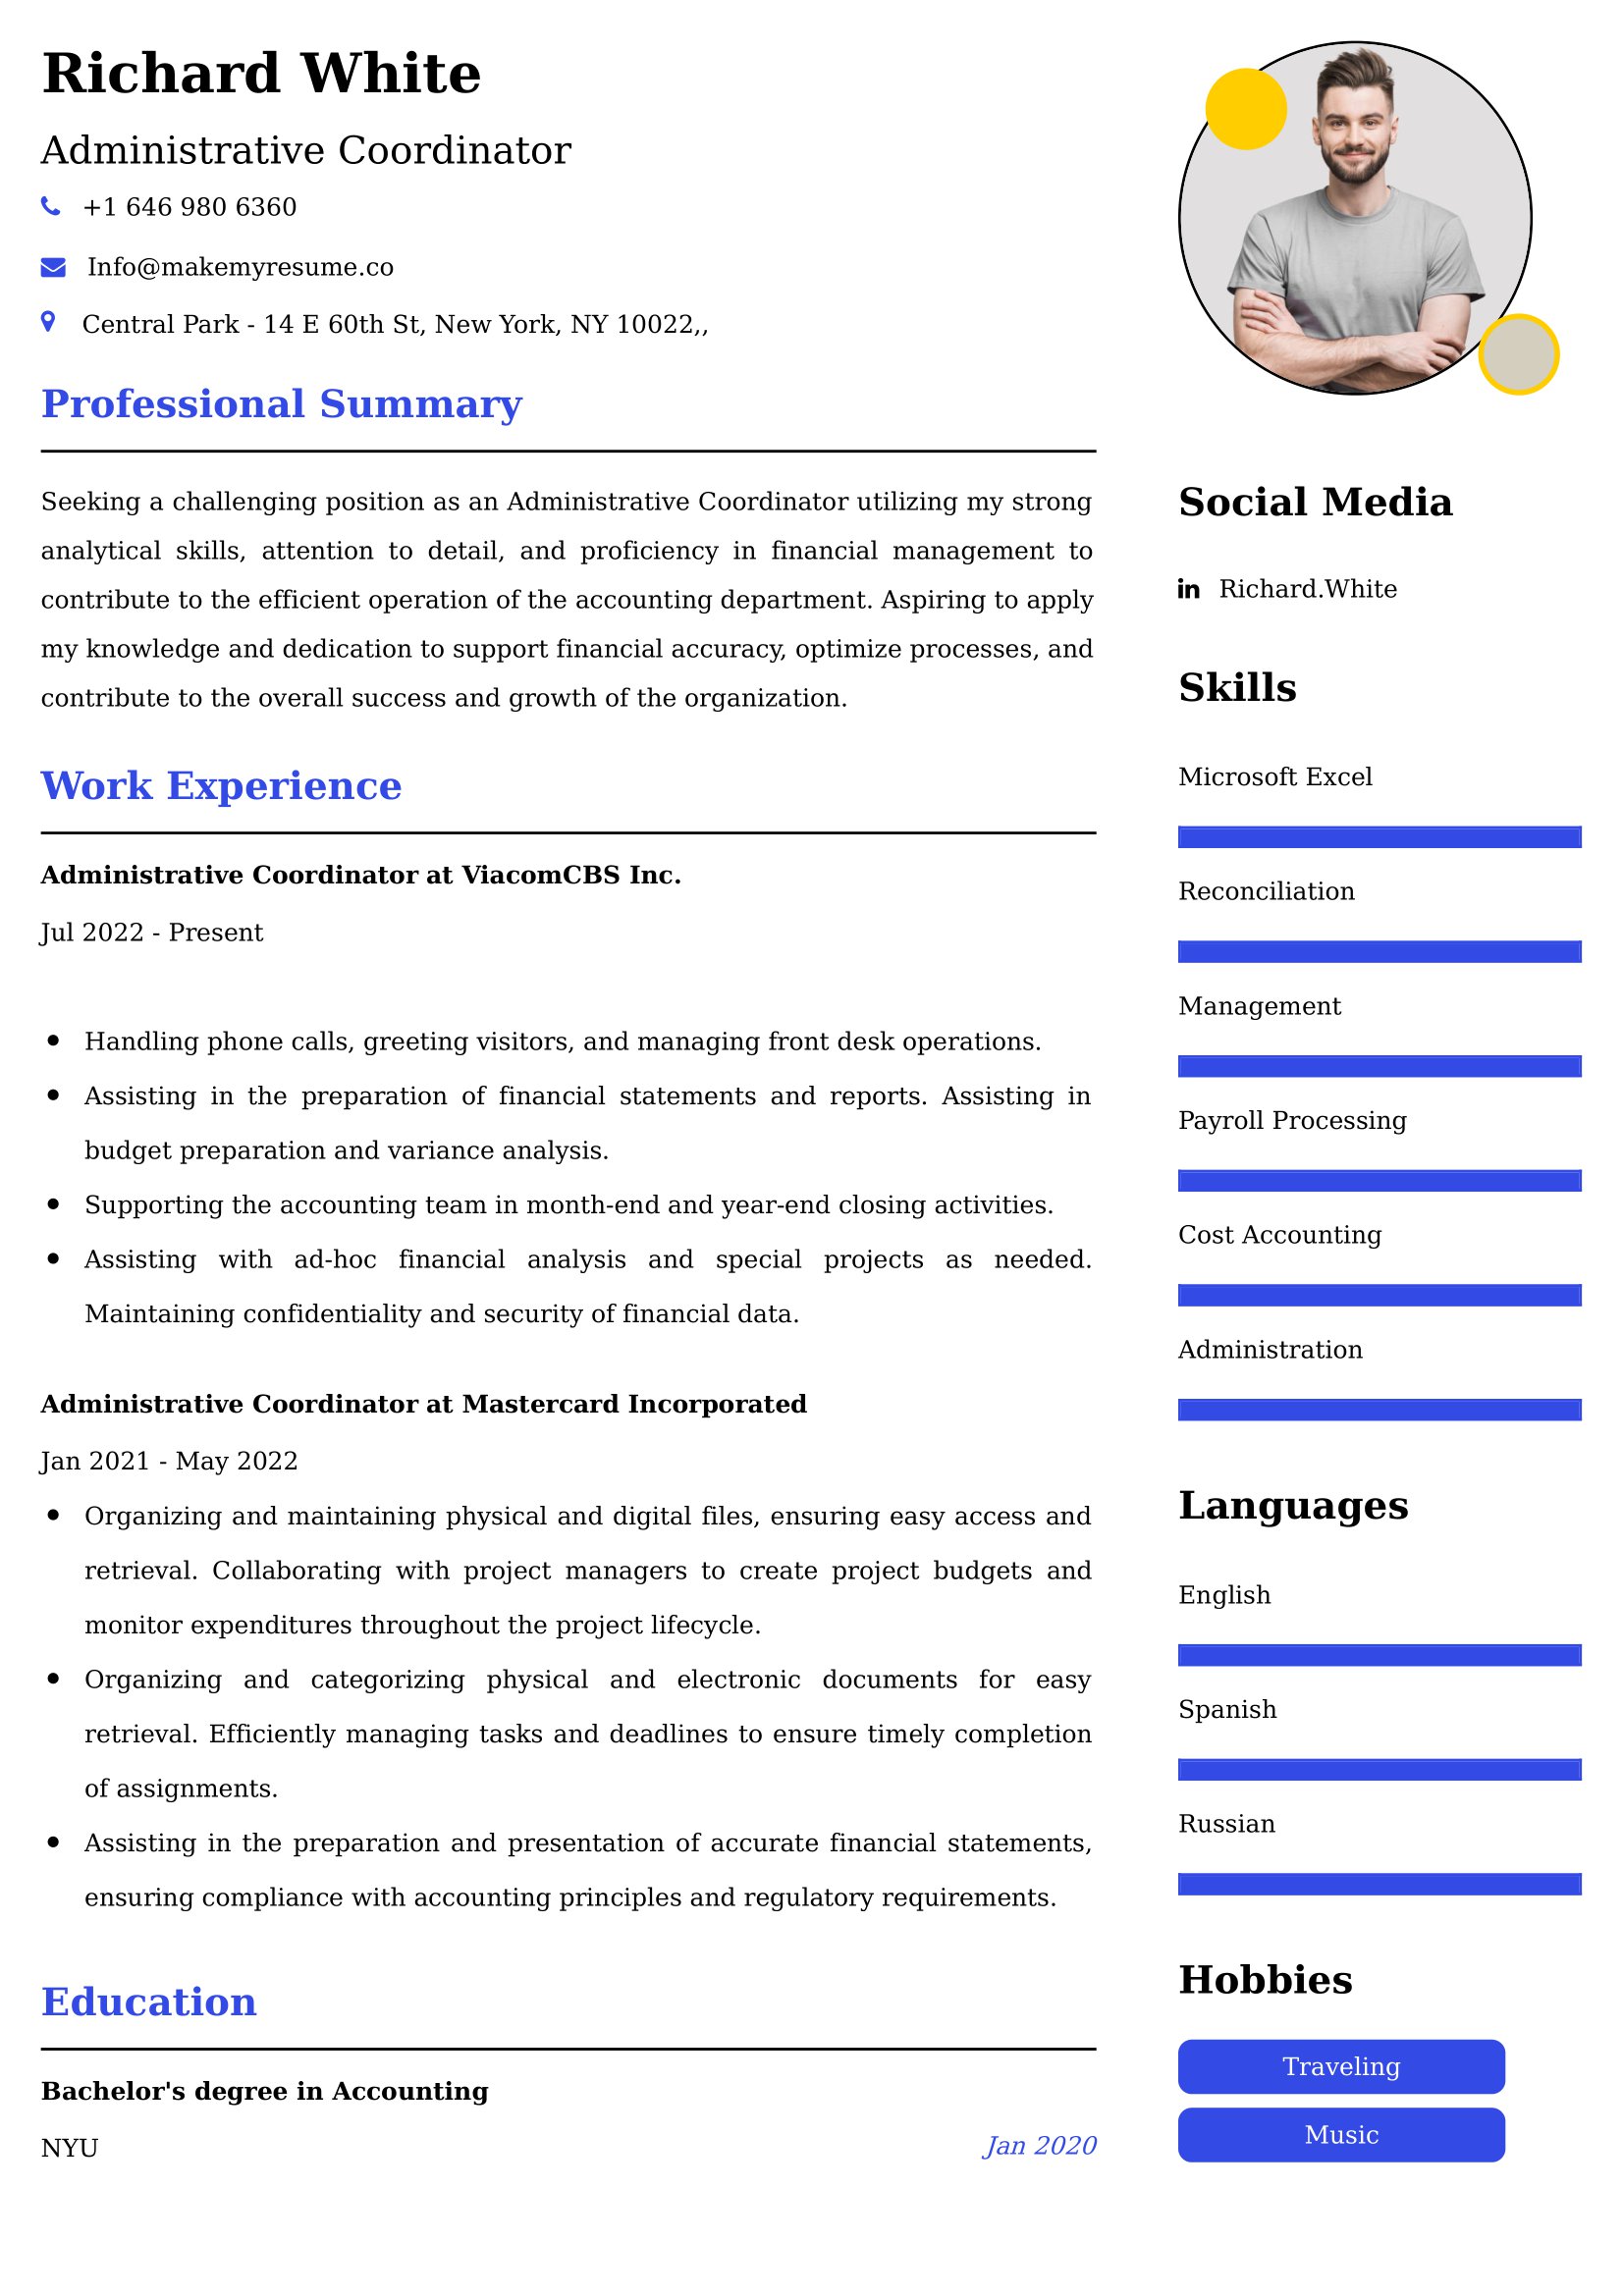 Administrative Coordinator Resume Examples - UK Format, Latest Template.